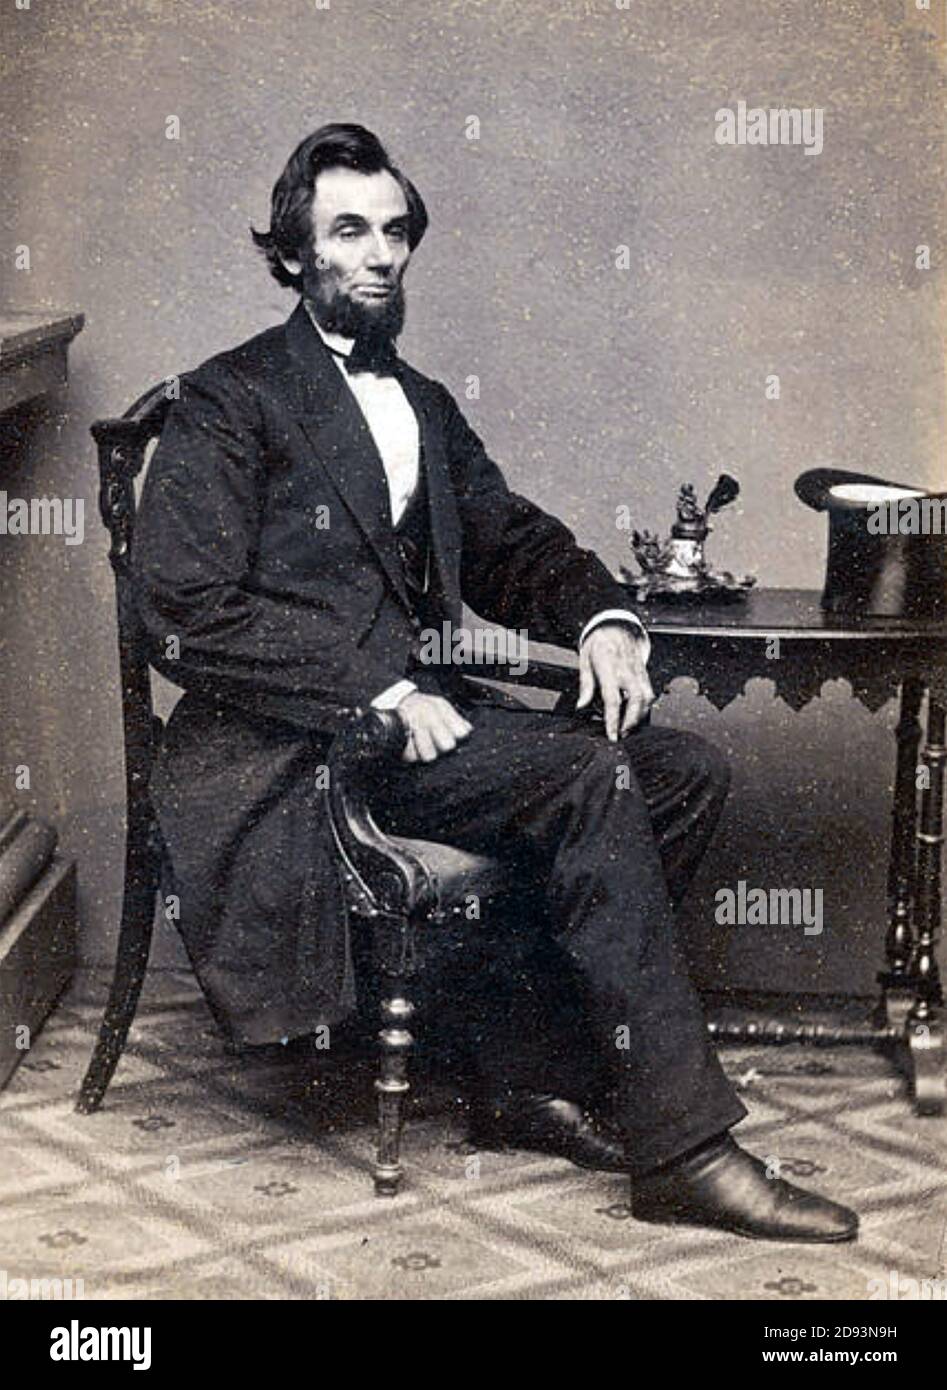 ABRAHAM LINCOLN (1809-1865) American statesman about 1850 Stock Photo